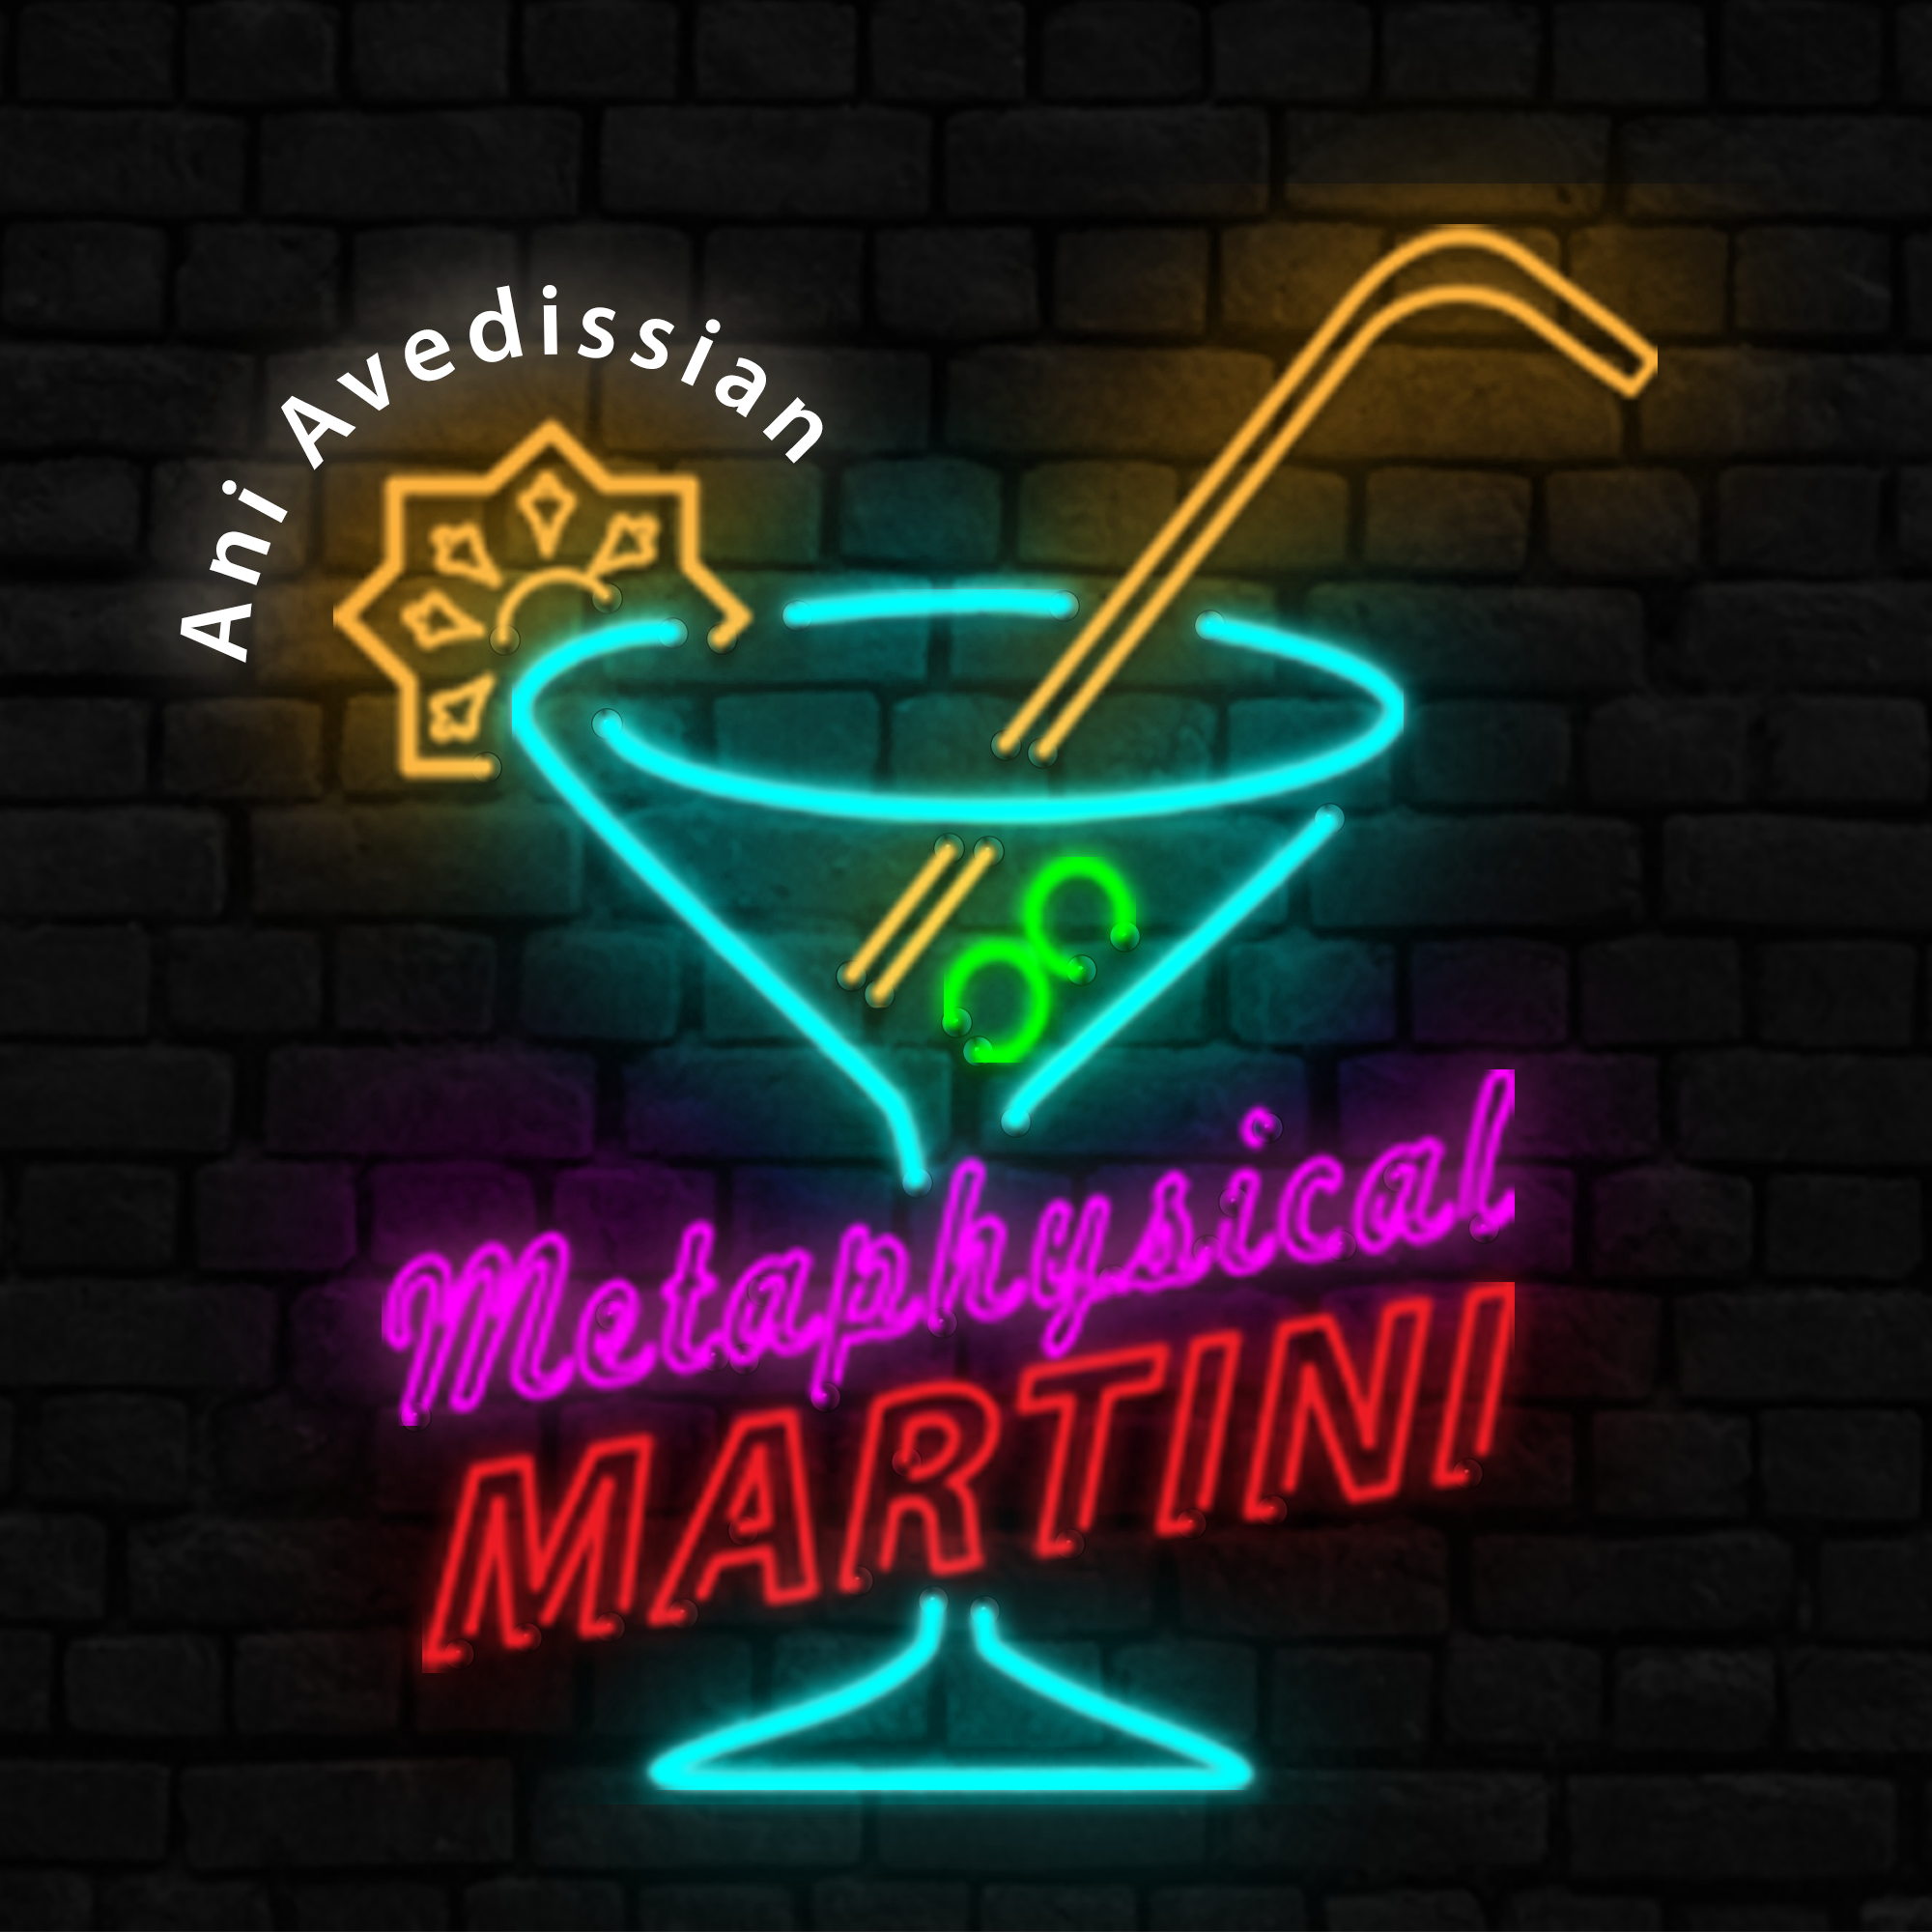 "Metaphysical Martini"   10/02/2019  Political correctness and so much more!